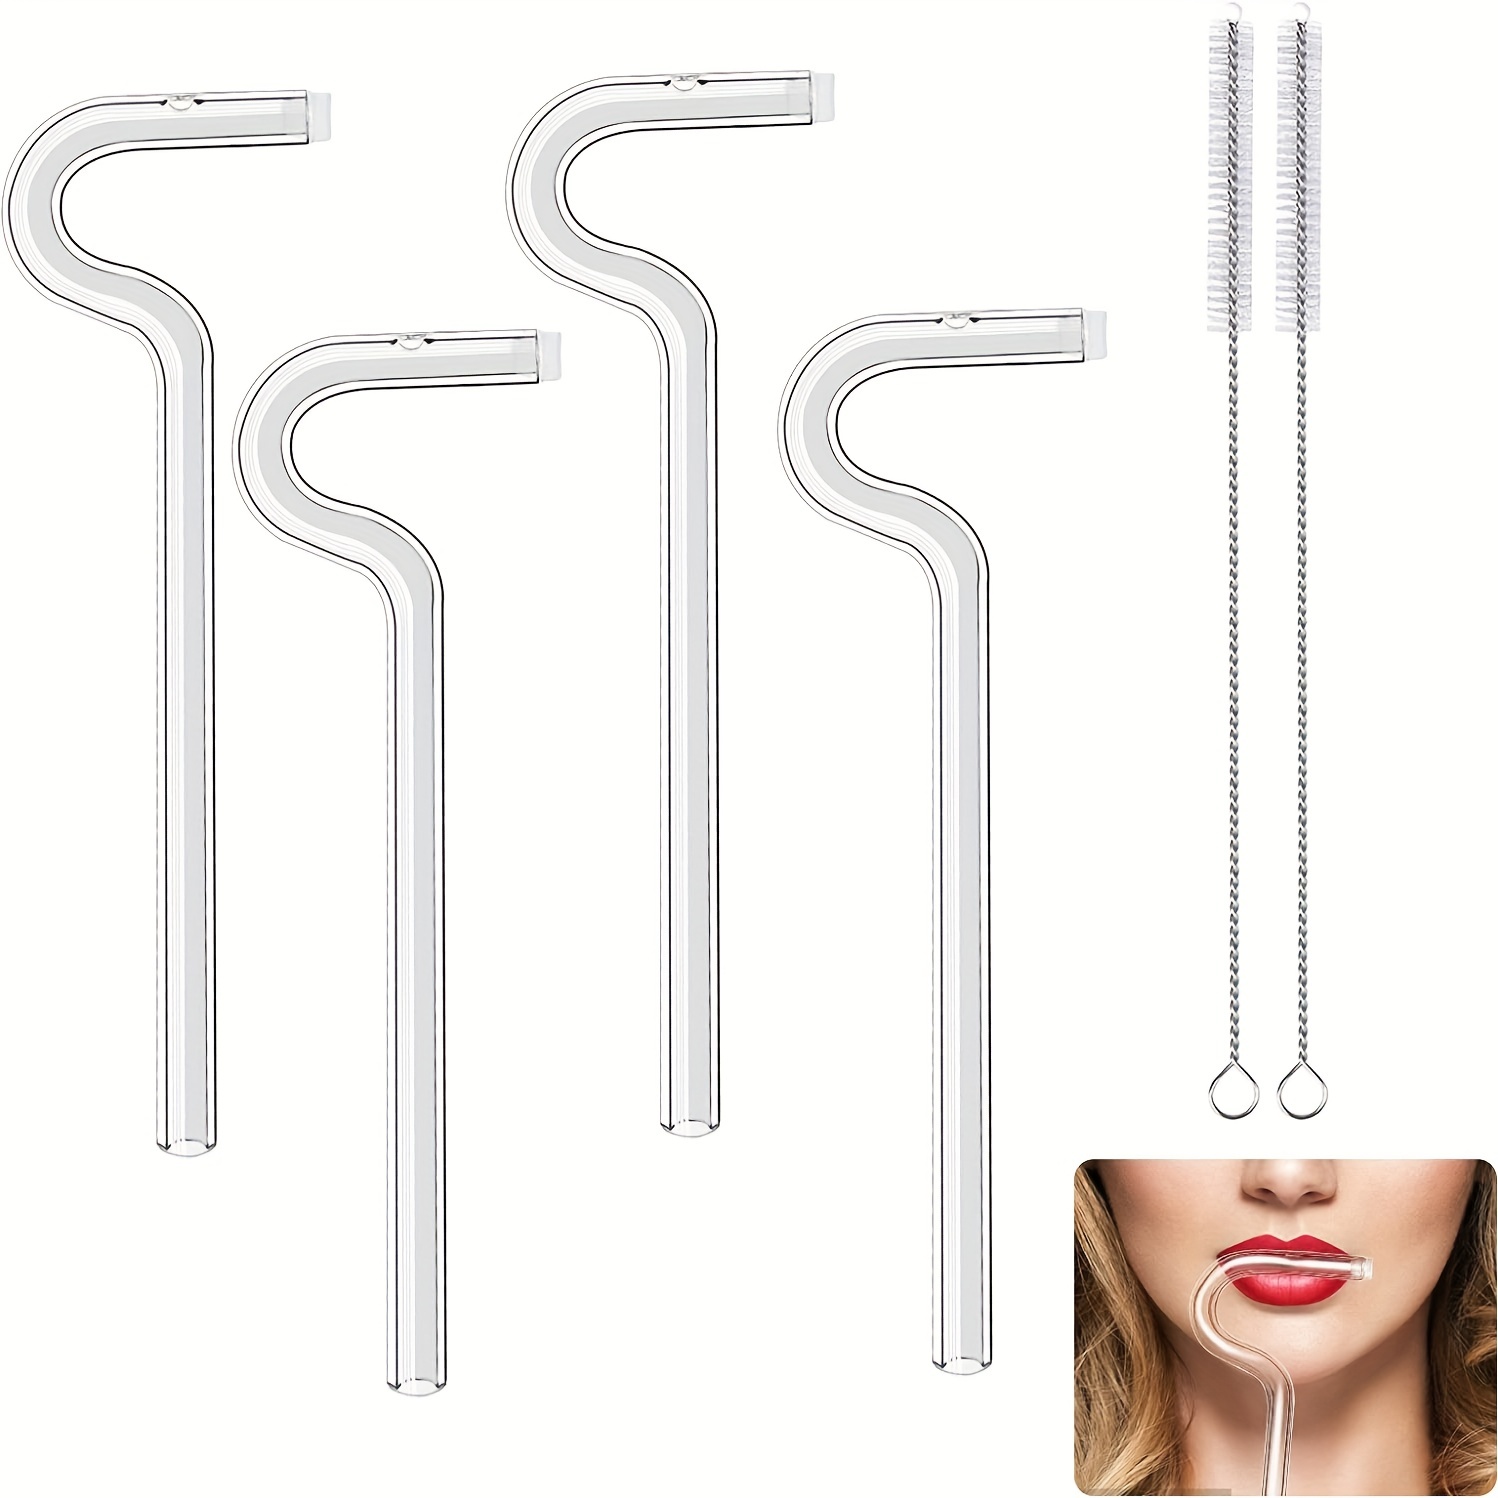  Anti Wrinkle Straw 2pcs, Reusable Glass Straw For Stanley  Cup, Anti Wrinkle Drinking Straw Curved, Lip Straw For Wrinkles, Sideways Straw  Wrinkle Free, Prevent Wrinkle Straw